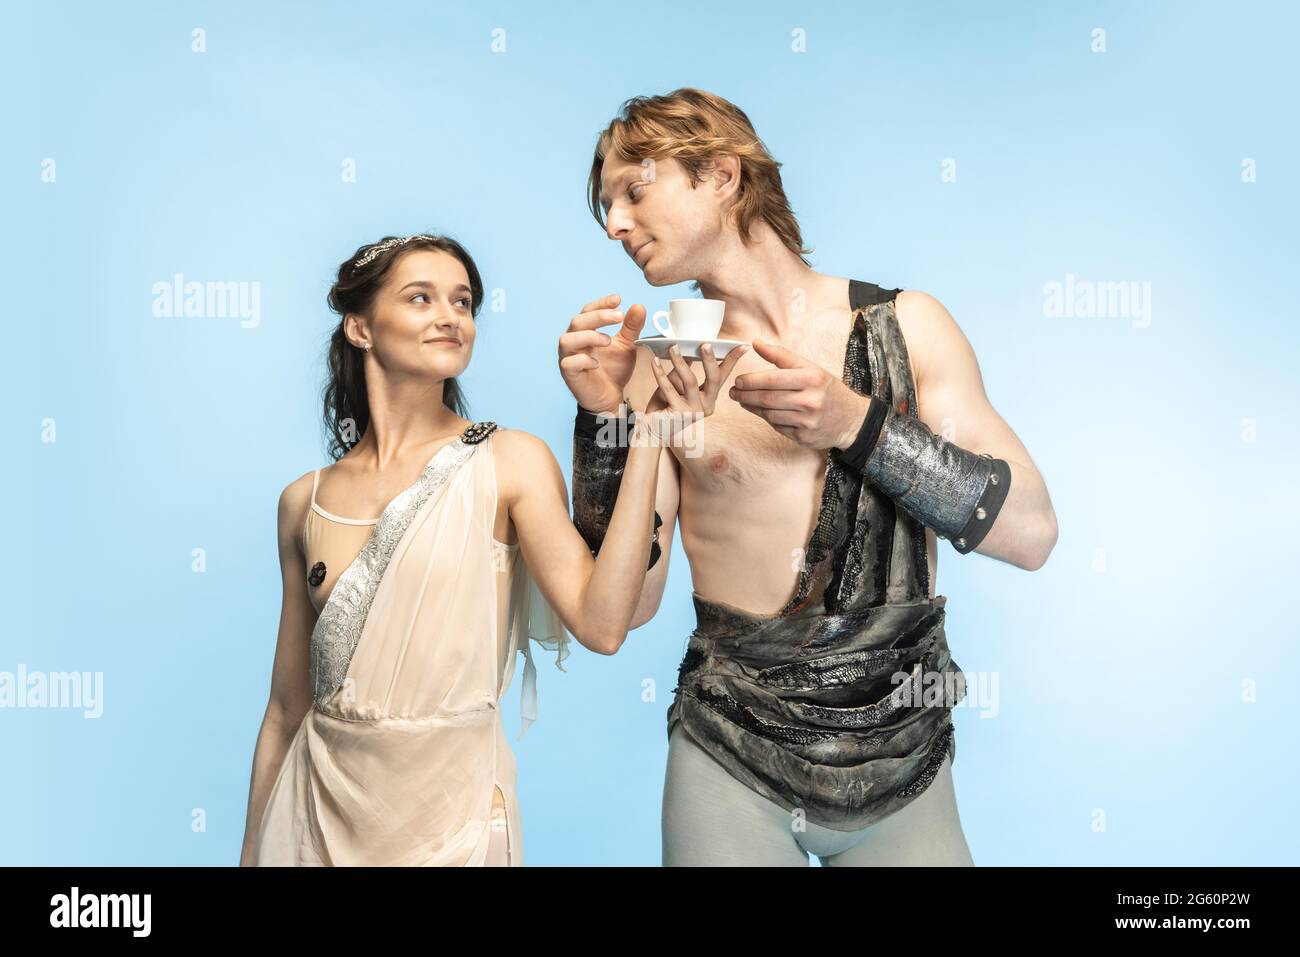 Coffee time. Young couple of ballet dancers in ancient Rome costums at blue studio. Stock Photo